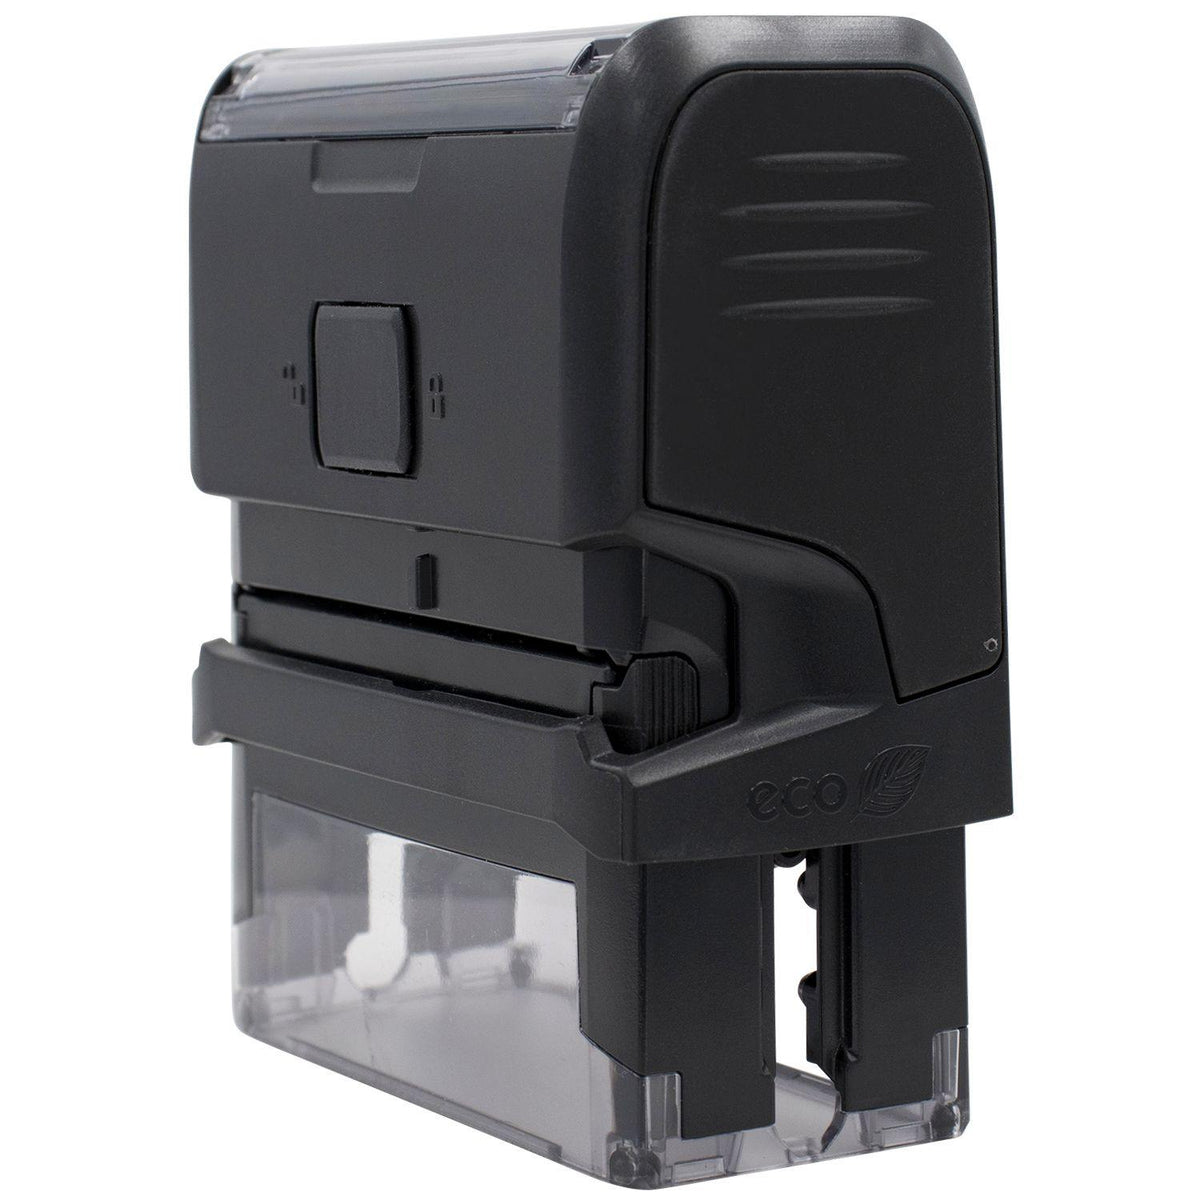 Large Self-Inking Pagado Stamp - Engineer Seal Stamps - Brand_Trodat, Impression Size_Large, Stamp Type_Self-Inking Stamp, Type of Use_Business, Type of Use_General, Type of Use_Office